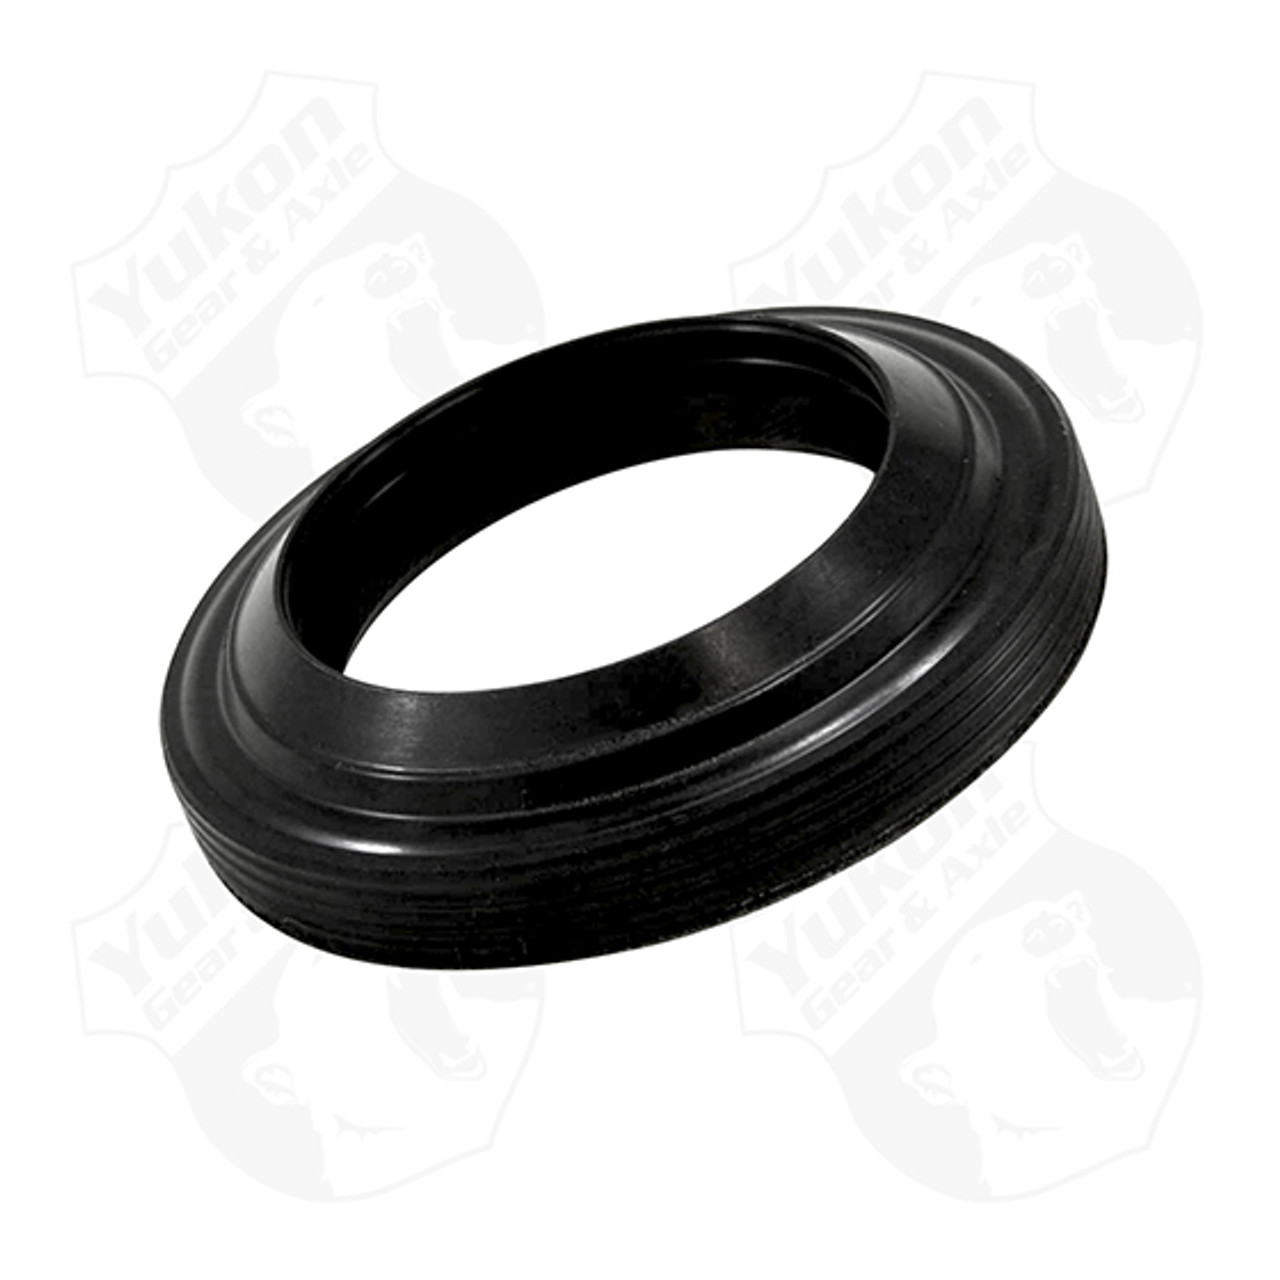 Replacement rear axle seal for Jeep JK Dana 44